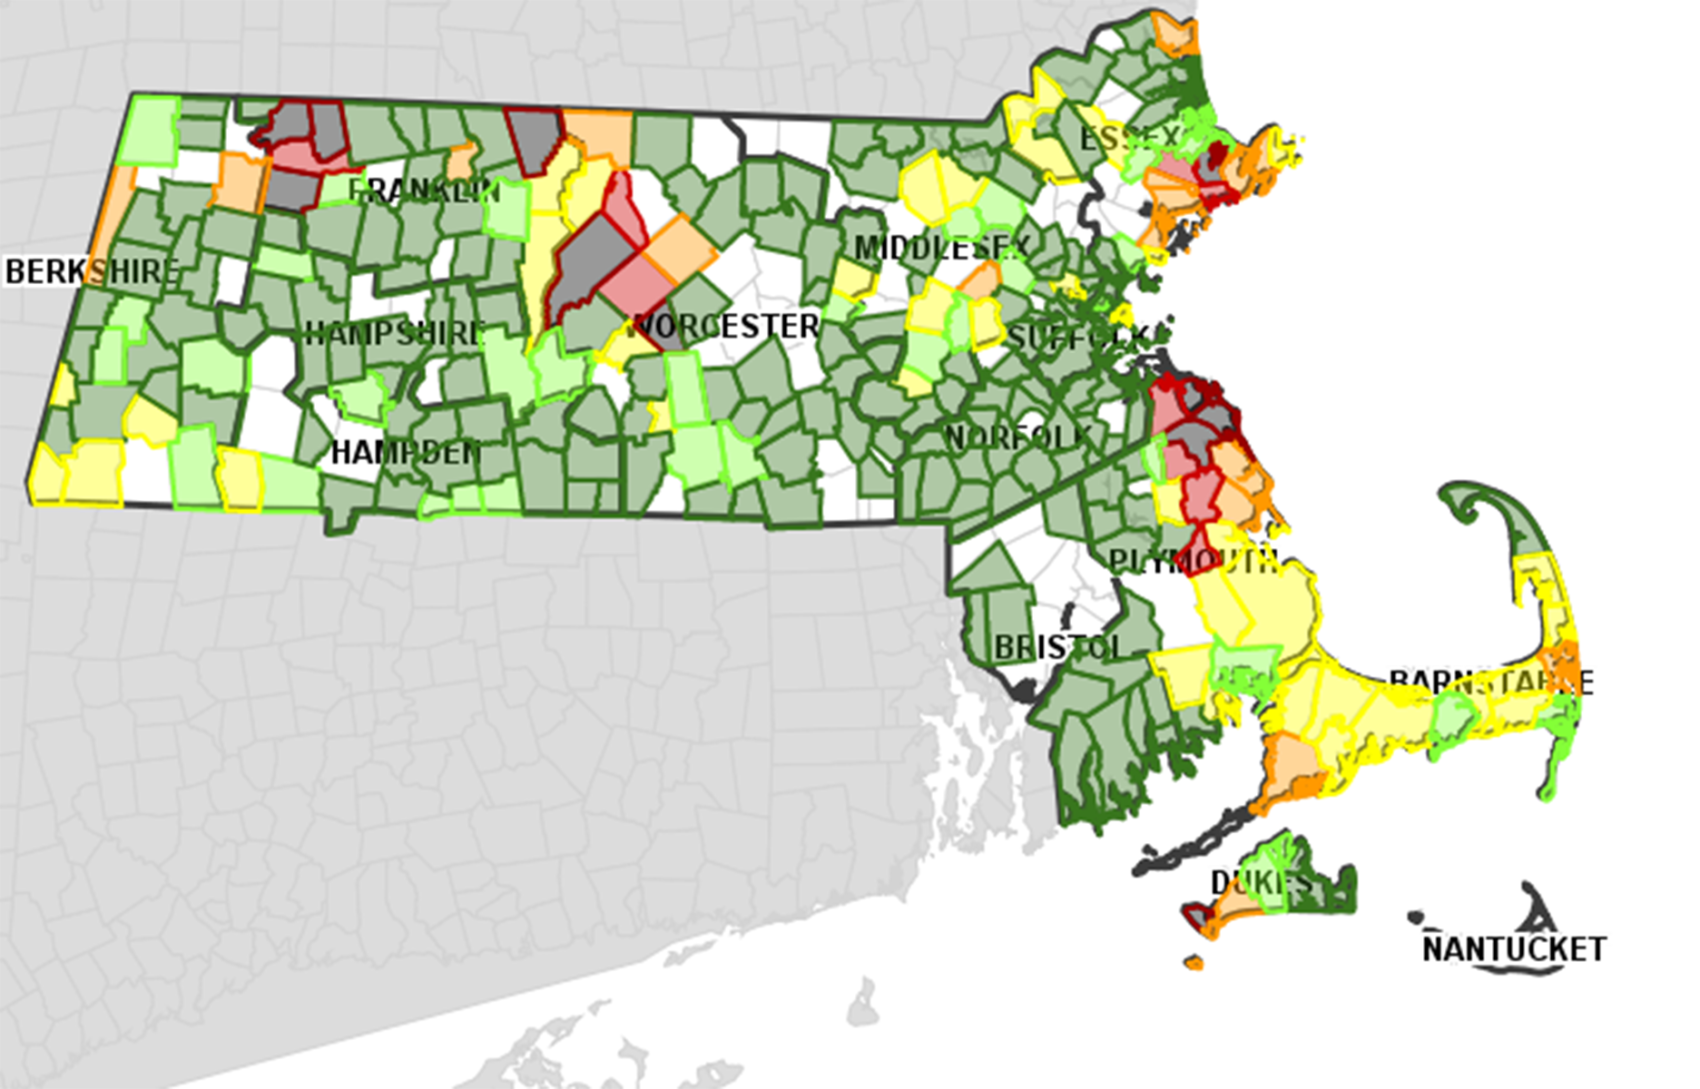 Power Restoration In Mass Could Take Days After Overnight Storm